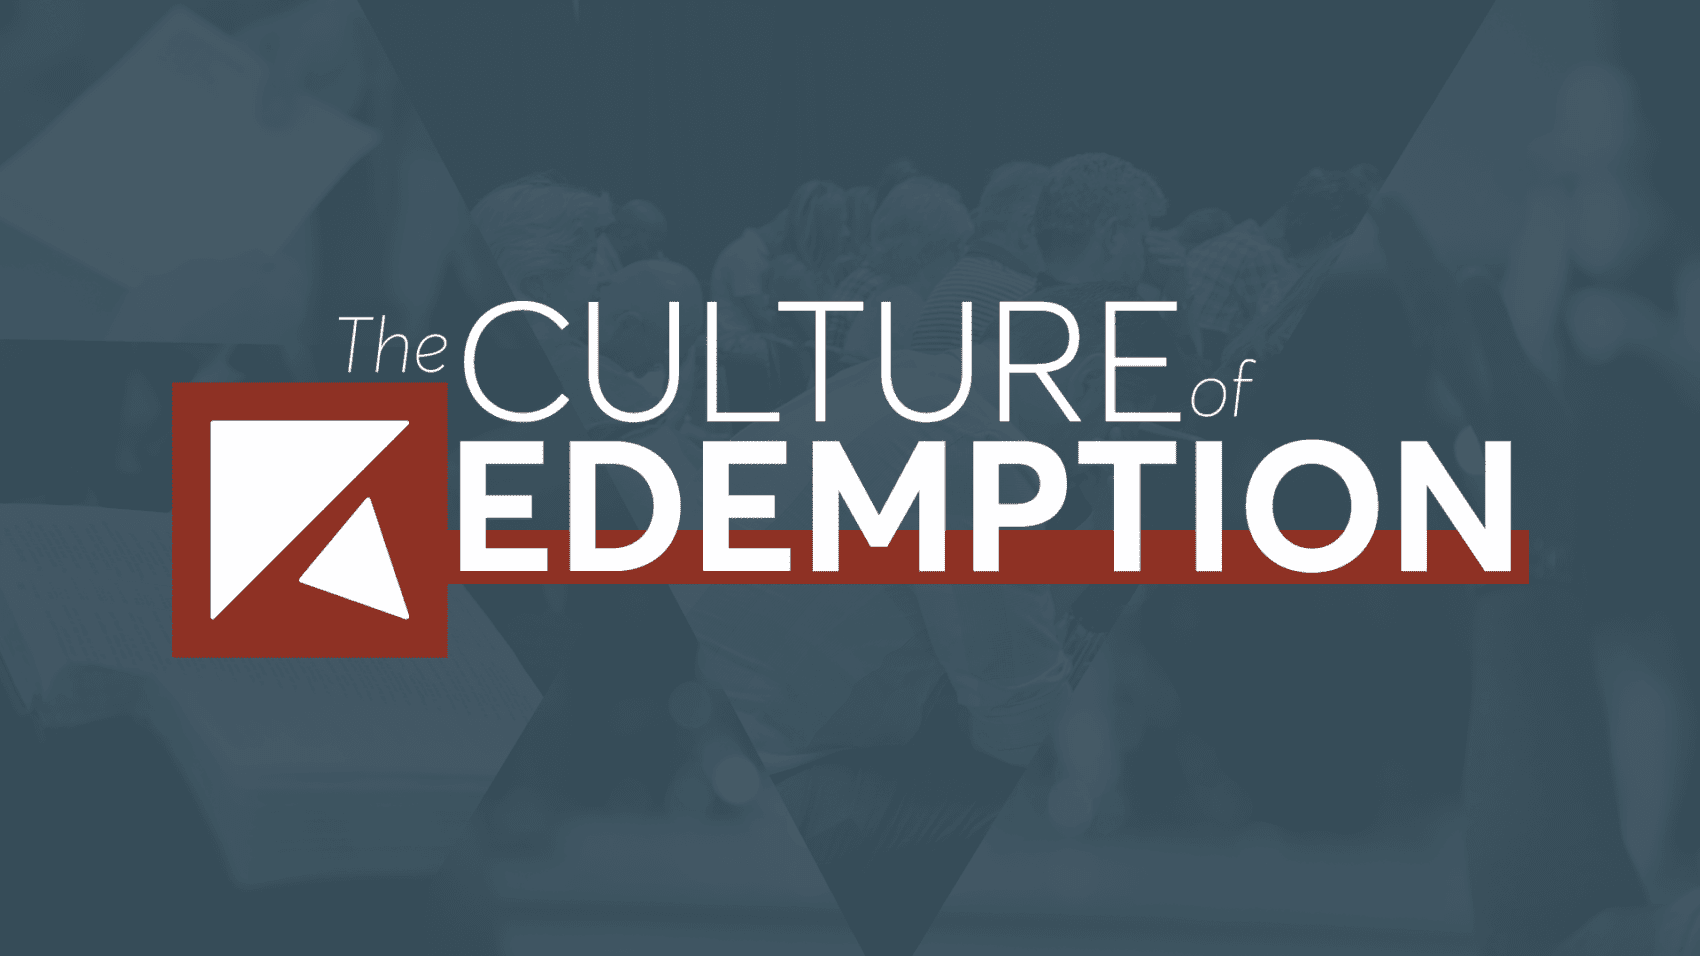 Featured image for “The Culture of Redemption”